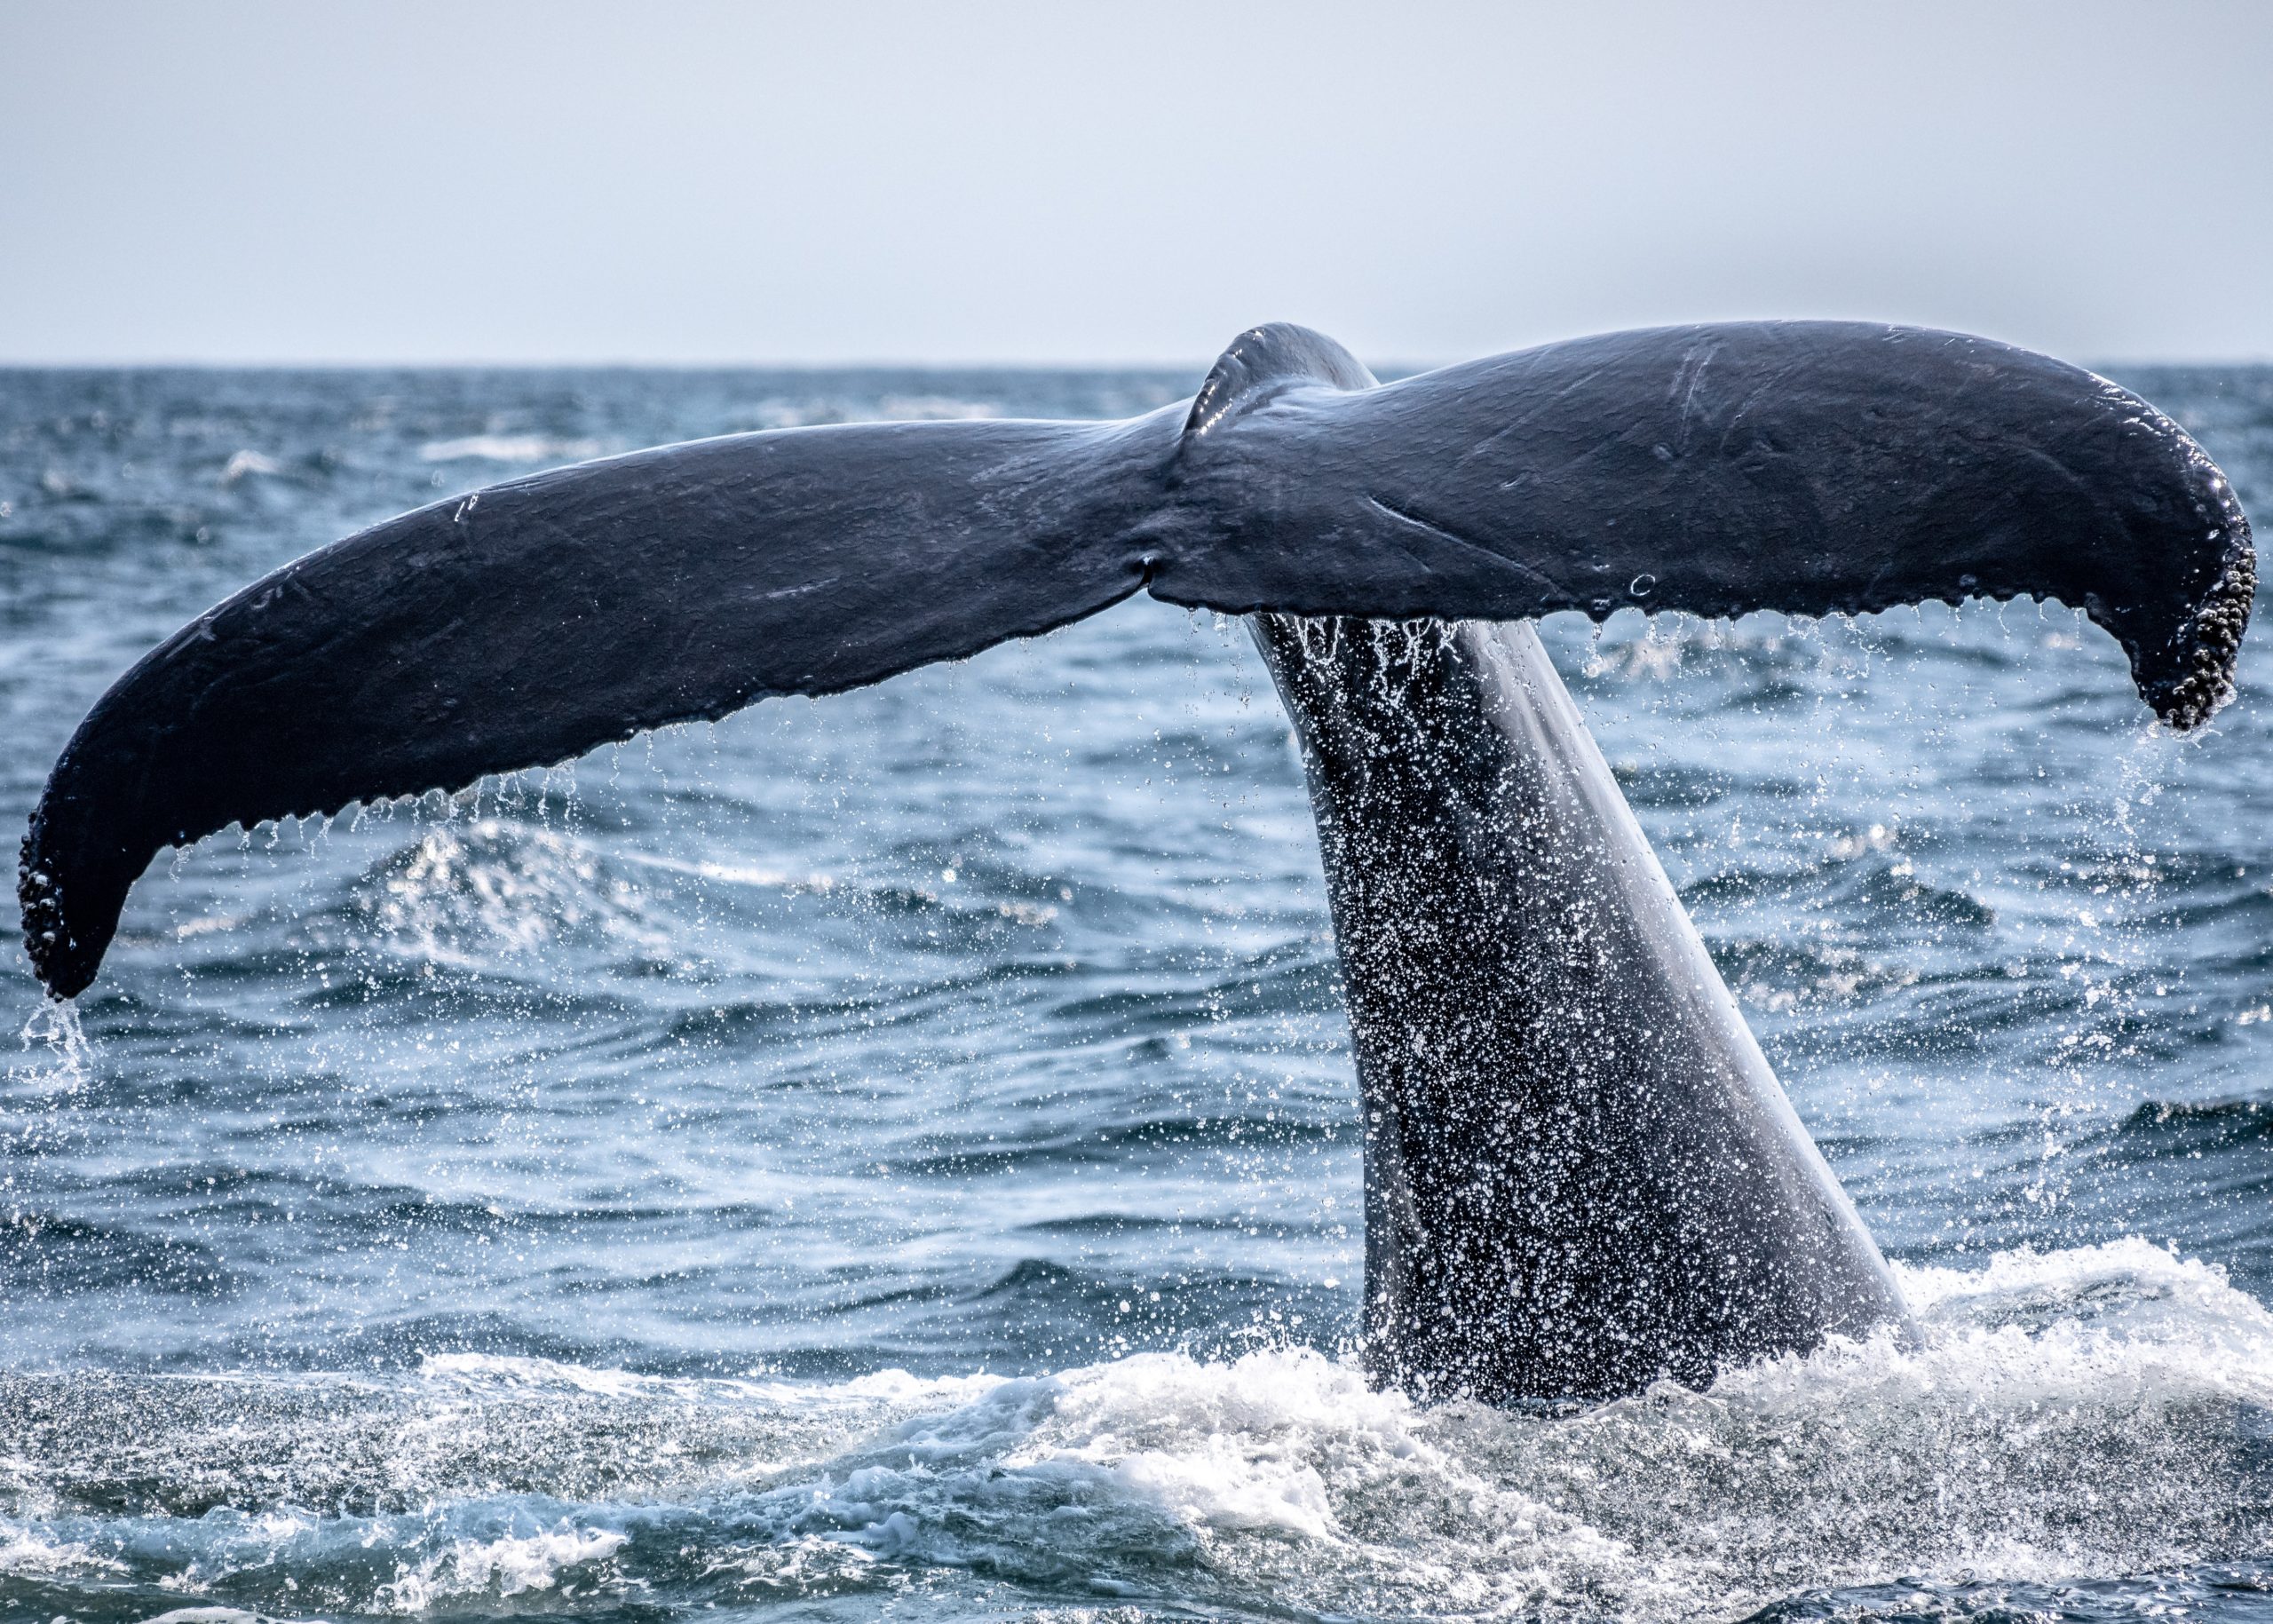 How Do Whales Defend Themselves? - Harbor Breeze Cruises